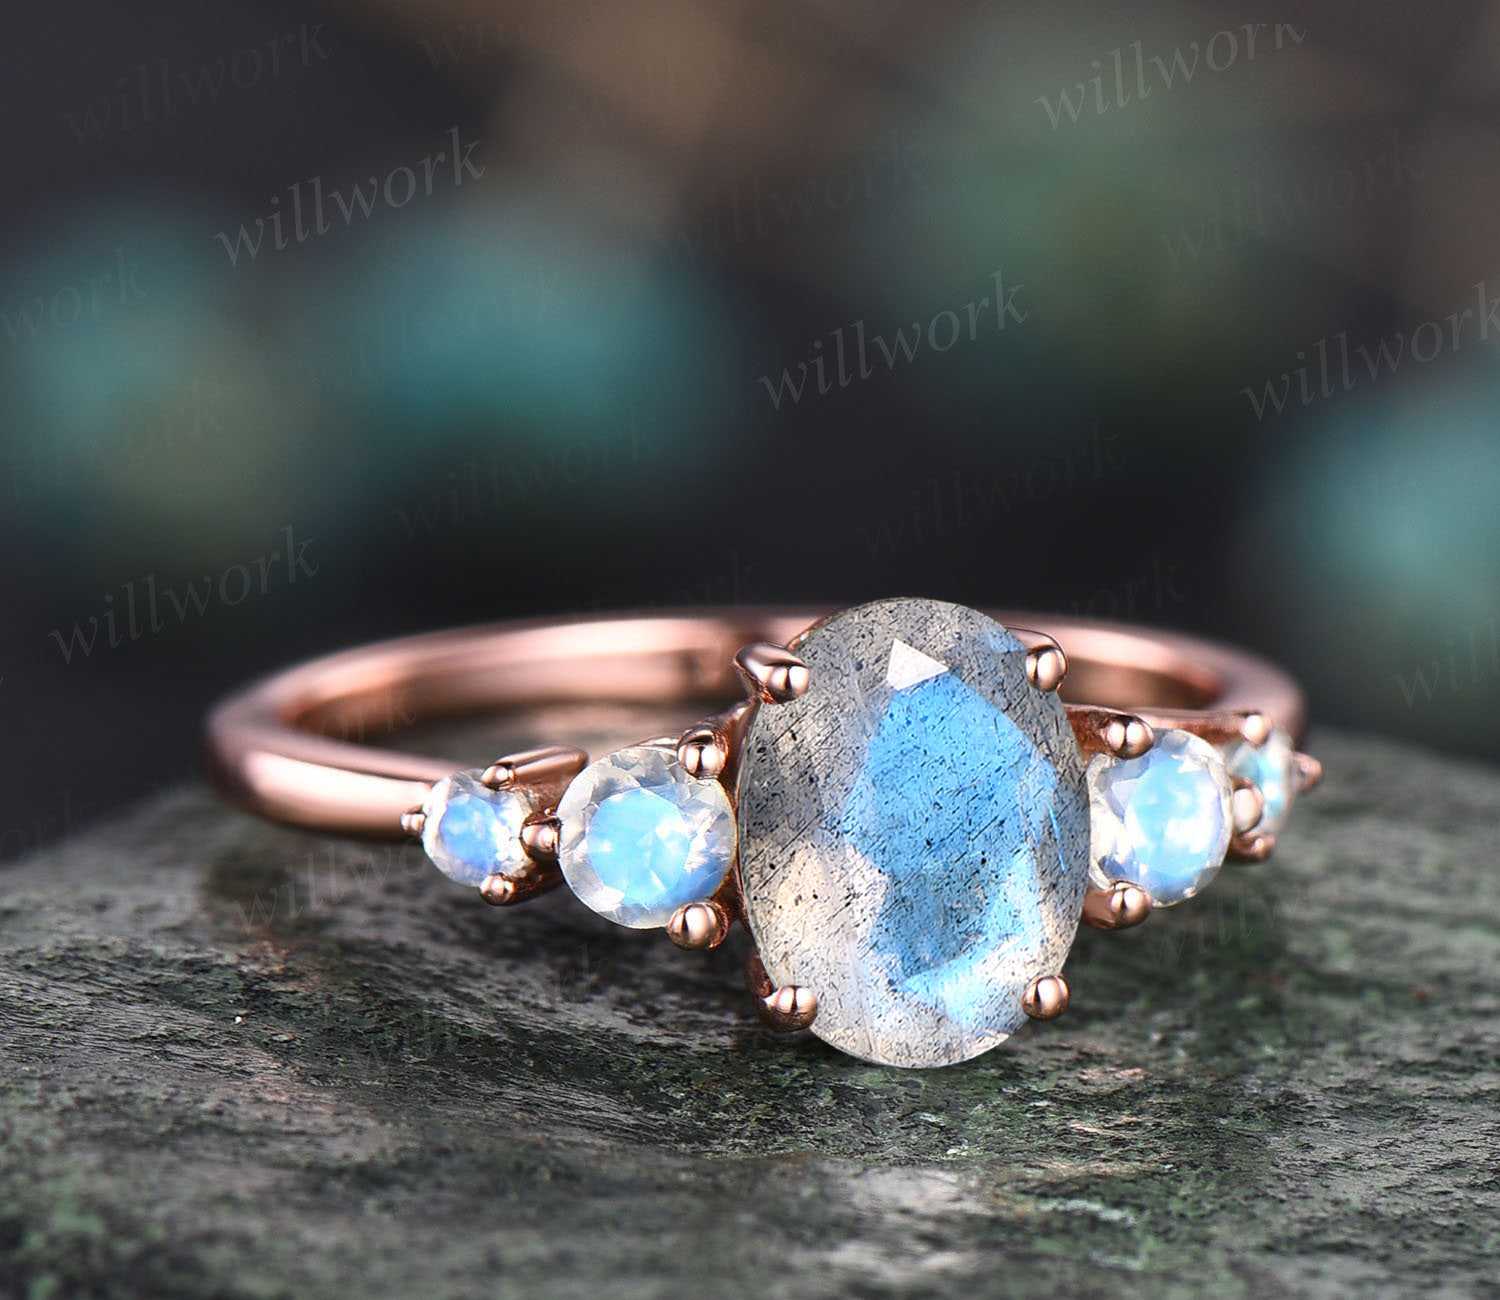 Royal Blue Stone Round Blue Sapphire Wedding Ring For Women Silver Metal  Crown Bands With Simple Zircon Accents Perfect For Engagement, Party  Jewelry And CZ Crafts From Shannonbrown, $12.04 | DHgate.Com